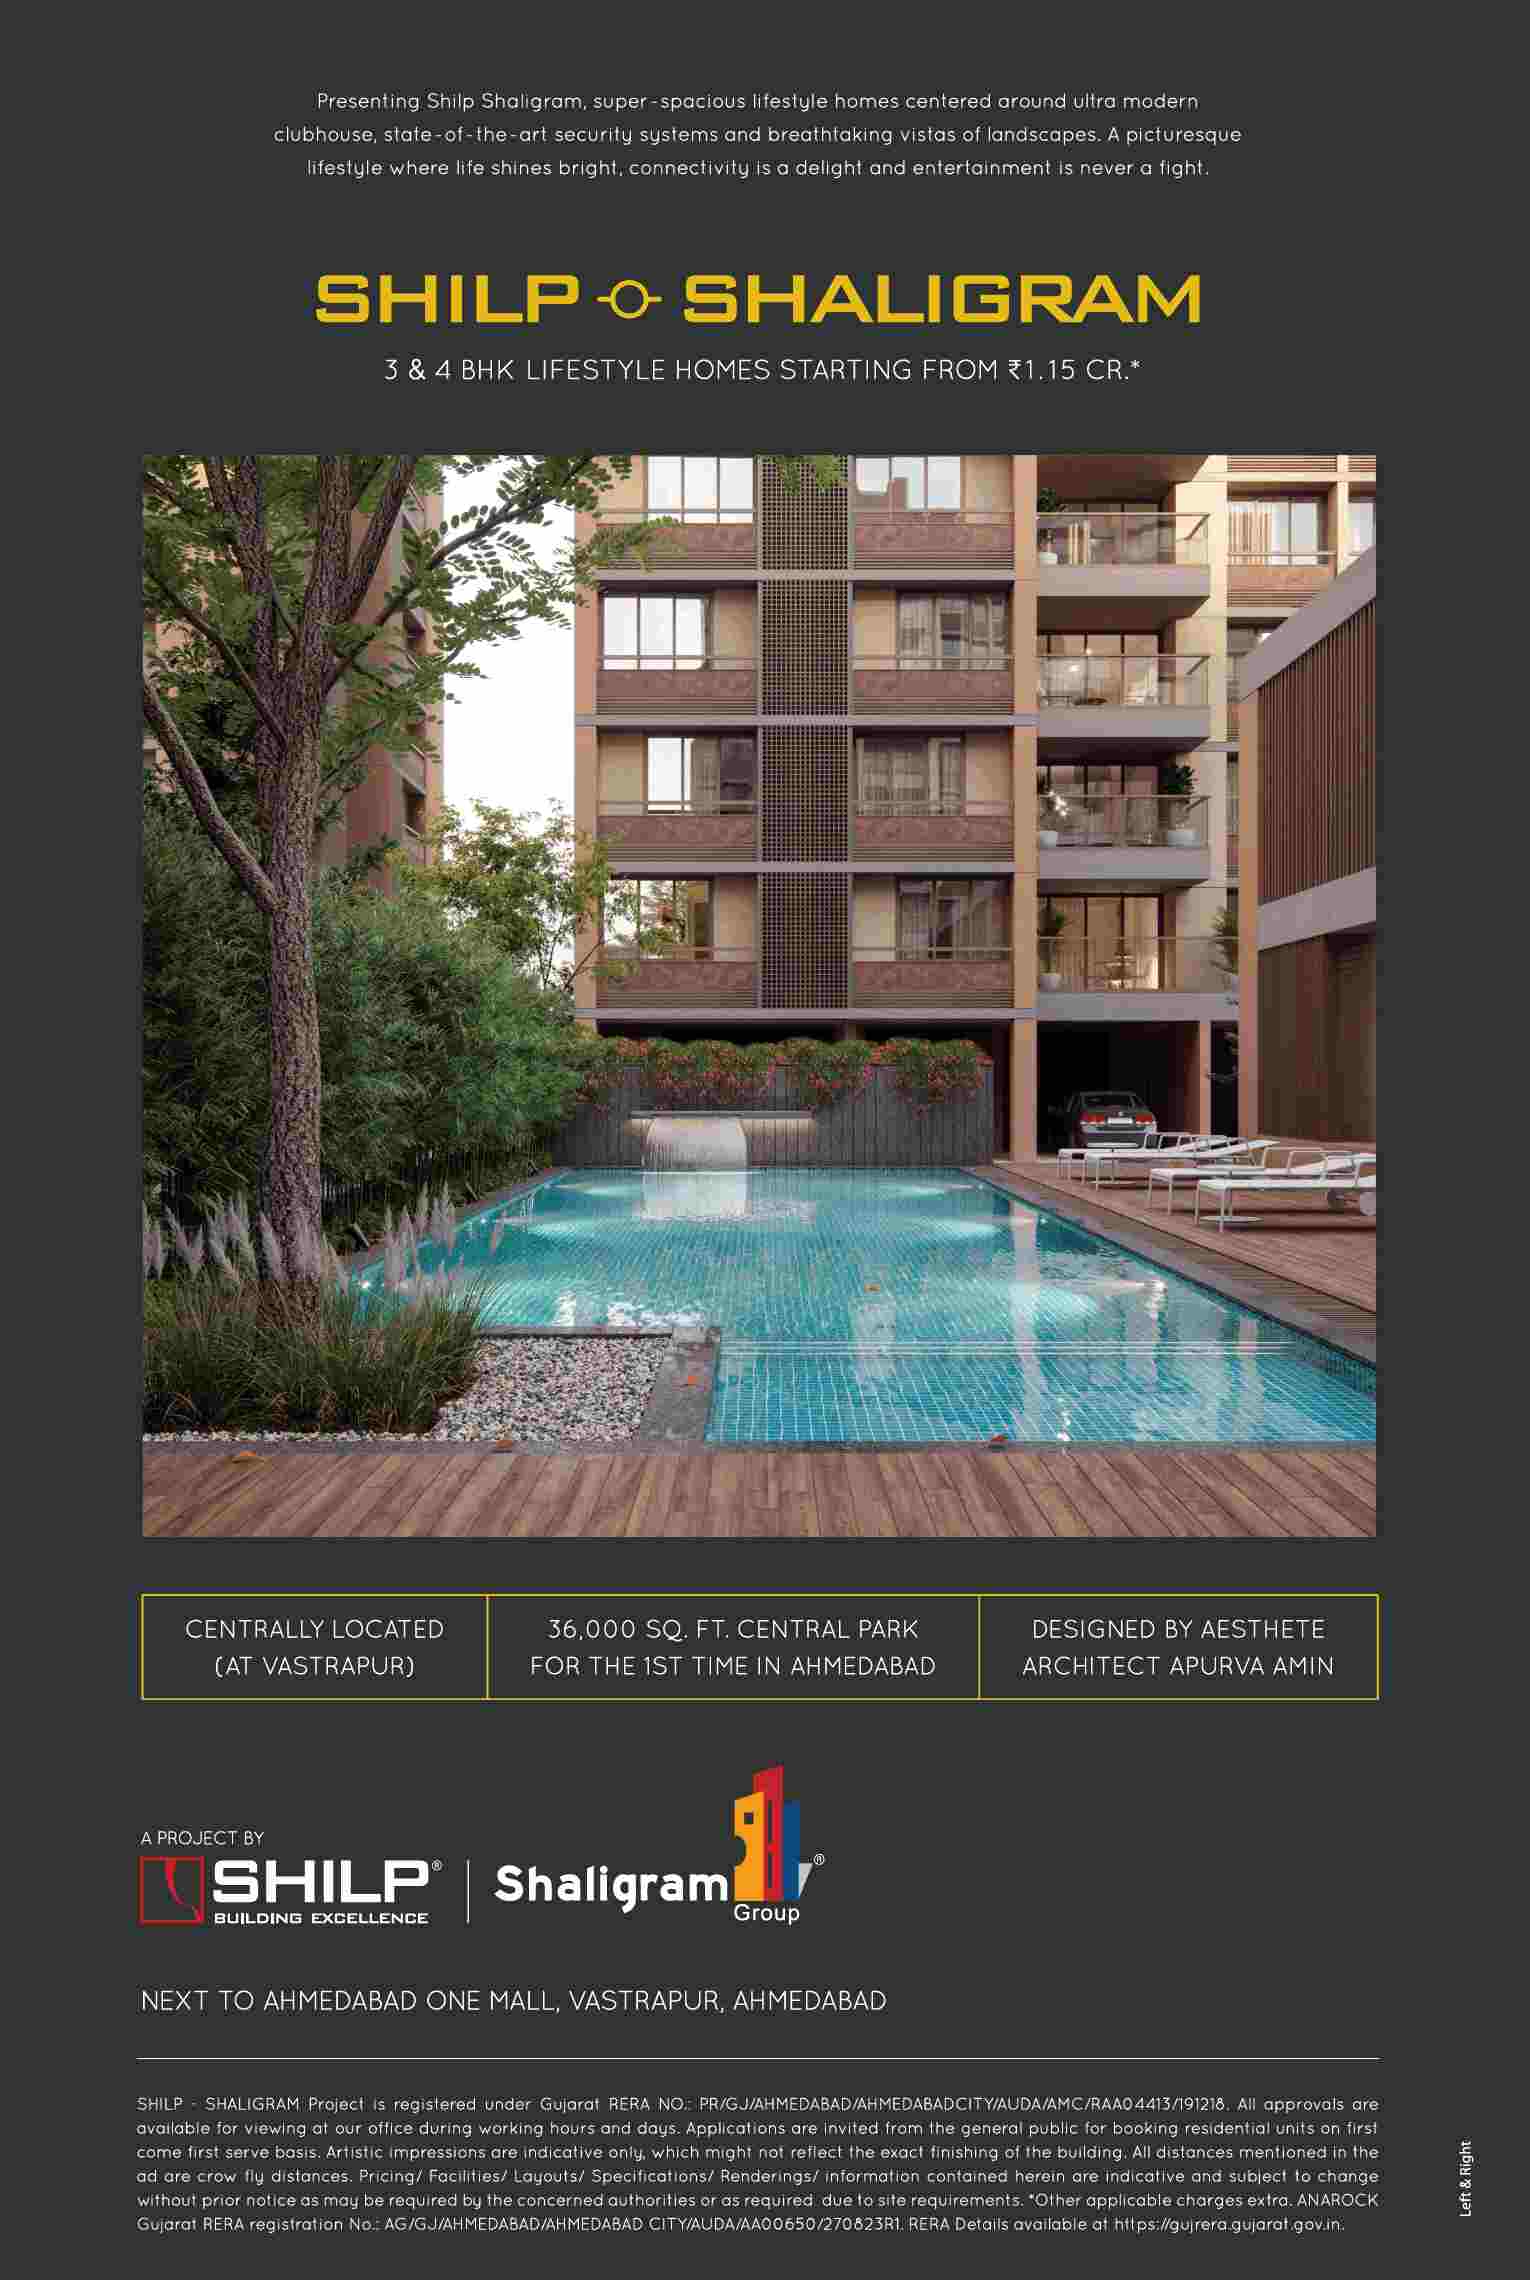 Presenting lifestyle homes @ 1.15 cr at Shilp Shaligram in Ahmedabad Update